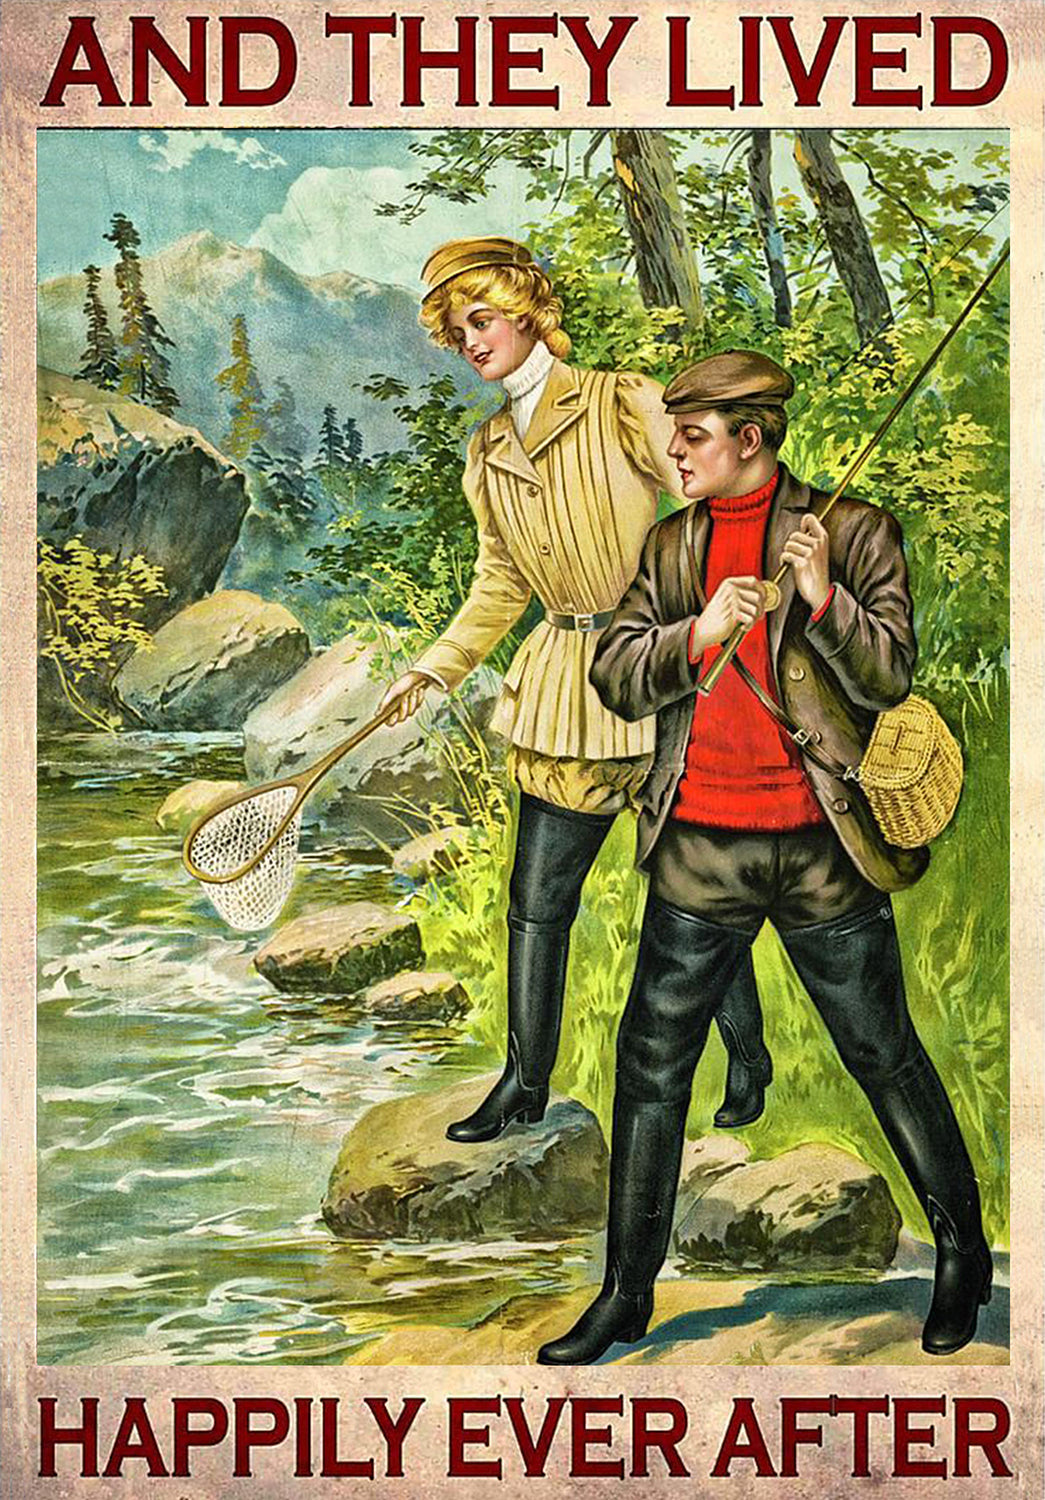 Fishing Couple And They Lived Happily Ever After-TT0208